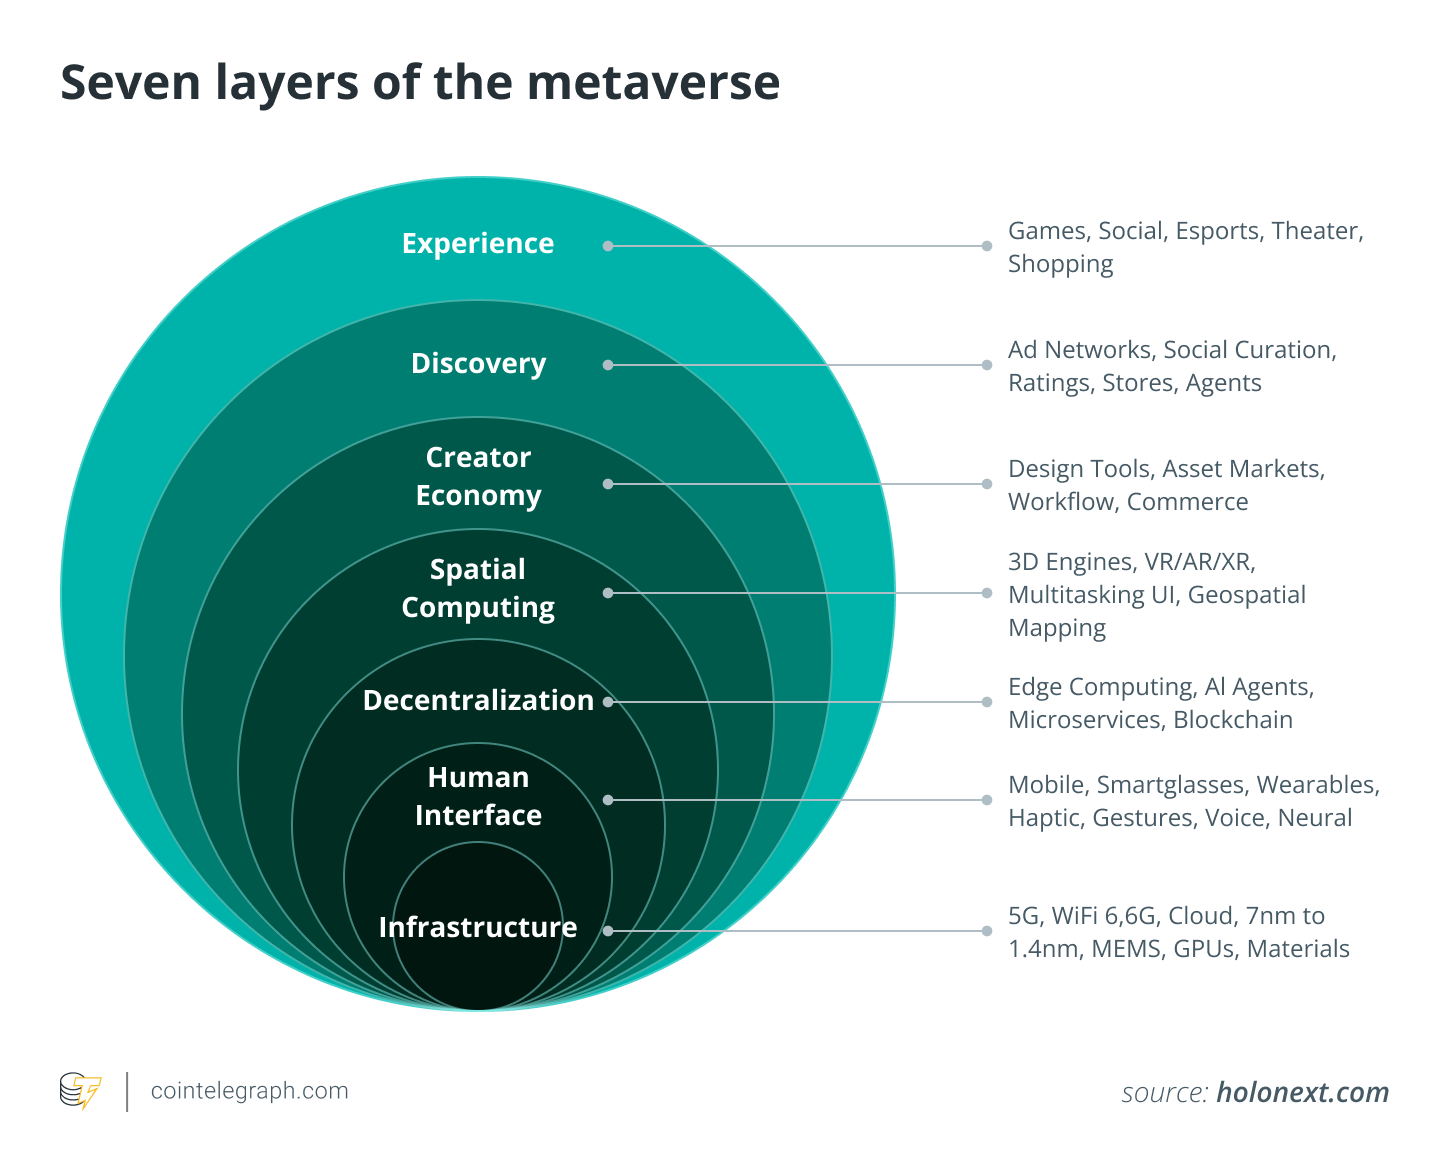 The key technologies that power the Metaverse